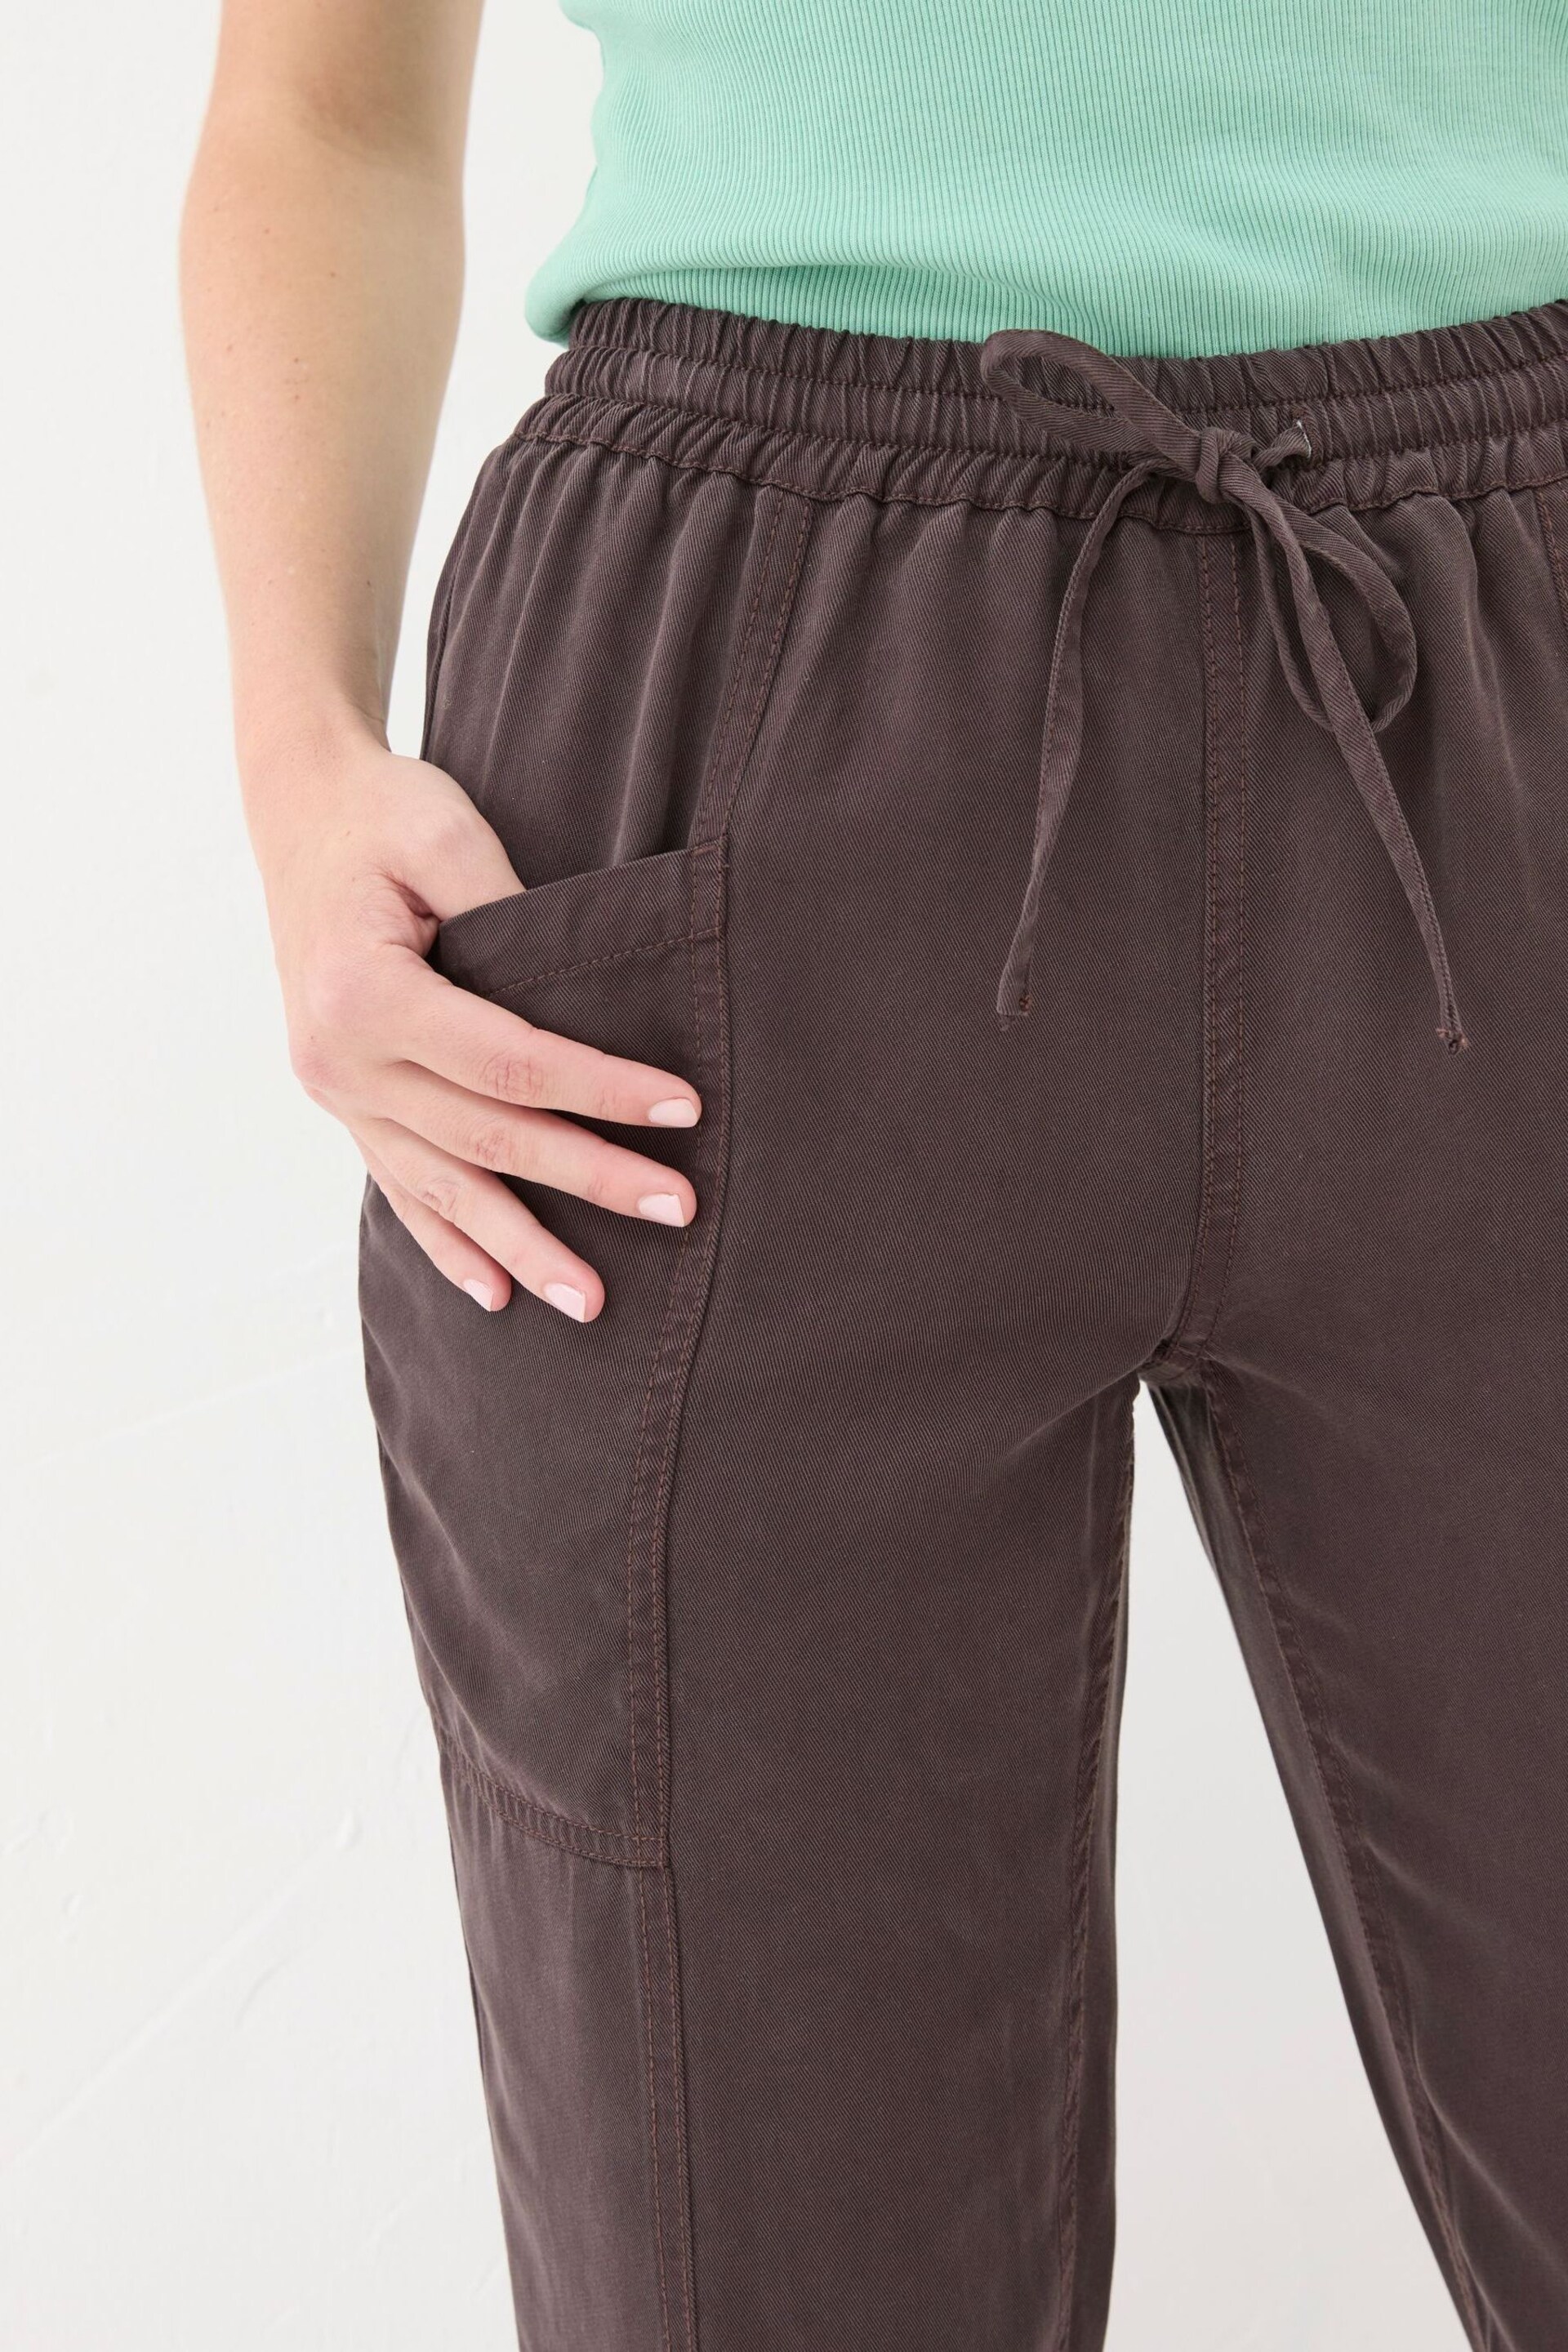 FatFace Brown Cargo Cuffed Joggers - Image 4 of 5